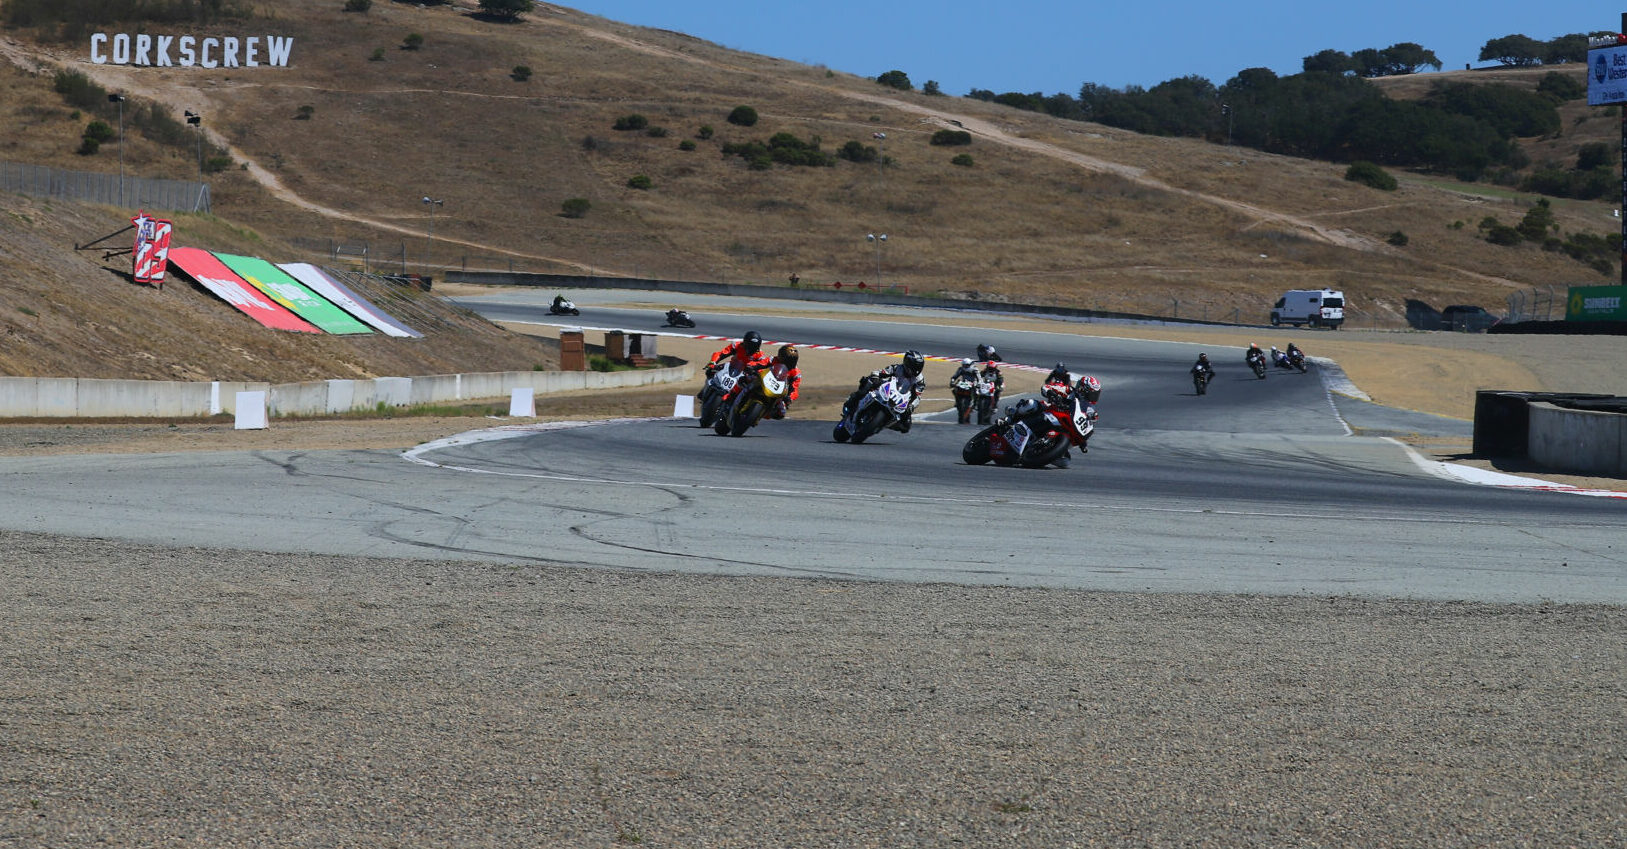 Action from the AHRMA Classic MotoFest at Laguna Seca in 2021. Photo by Etechphoto.com, courtesy AHRMA.